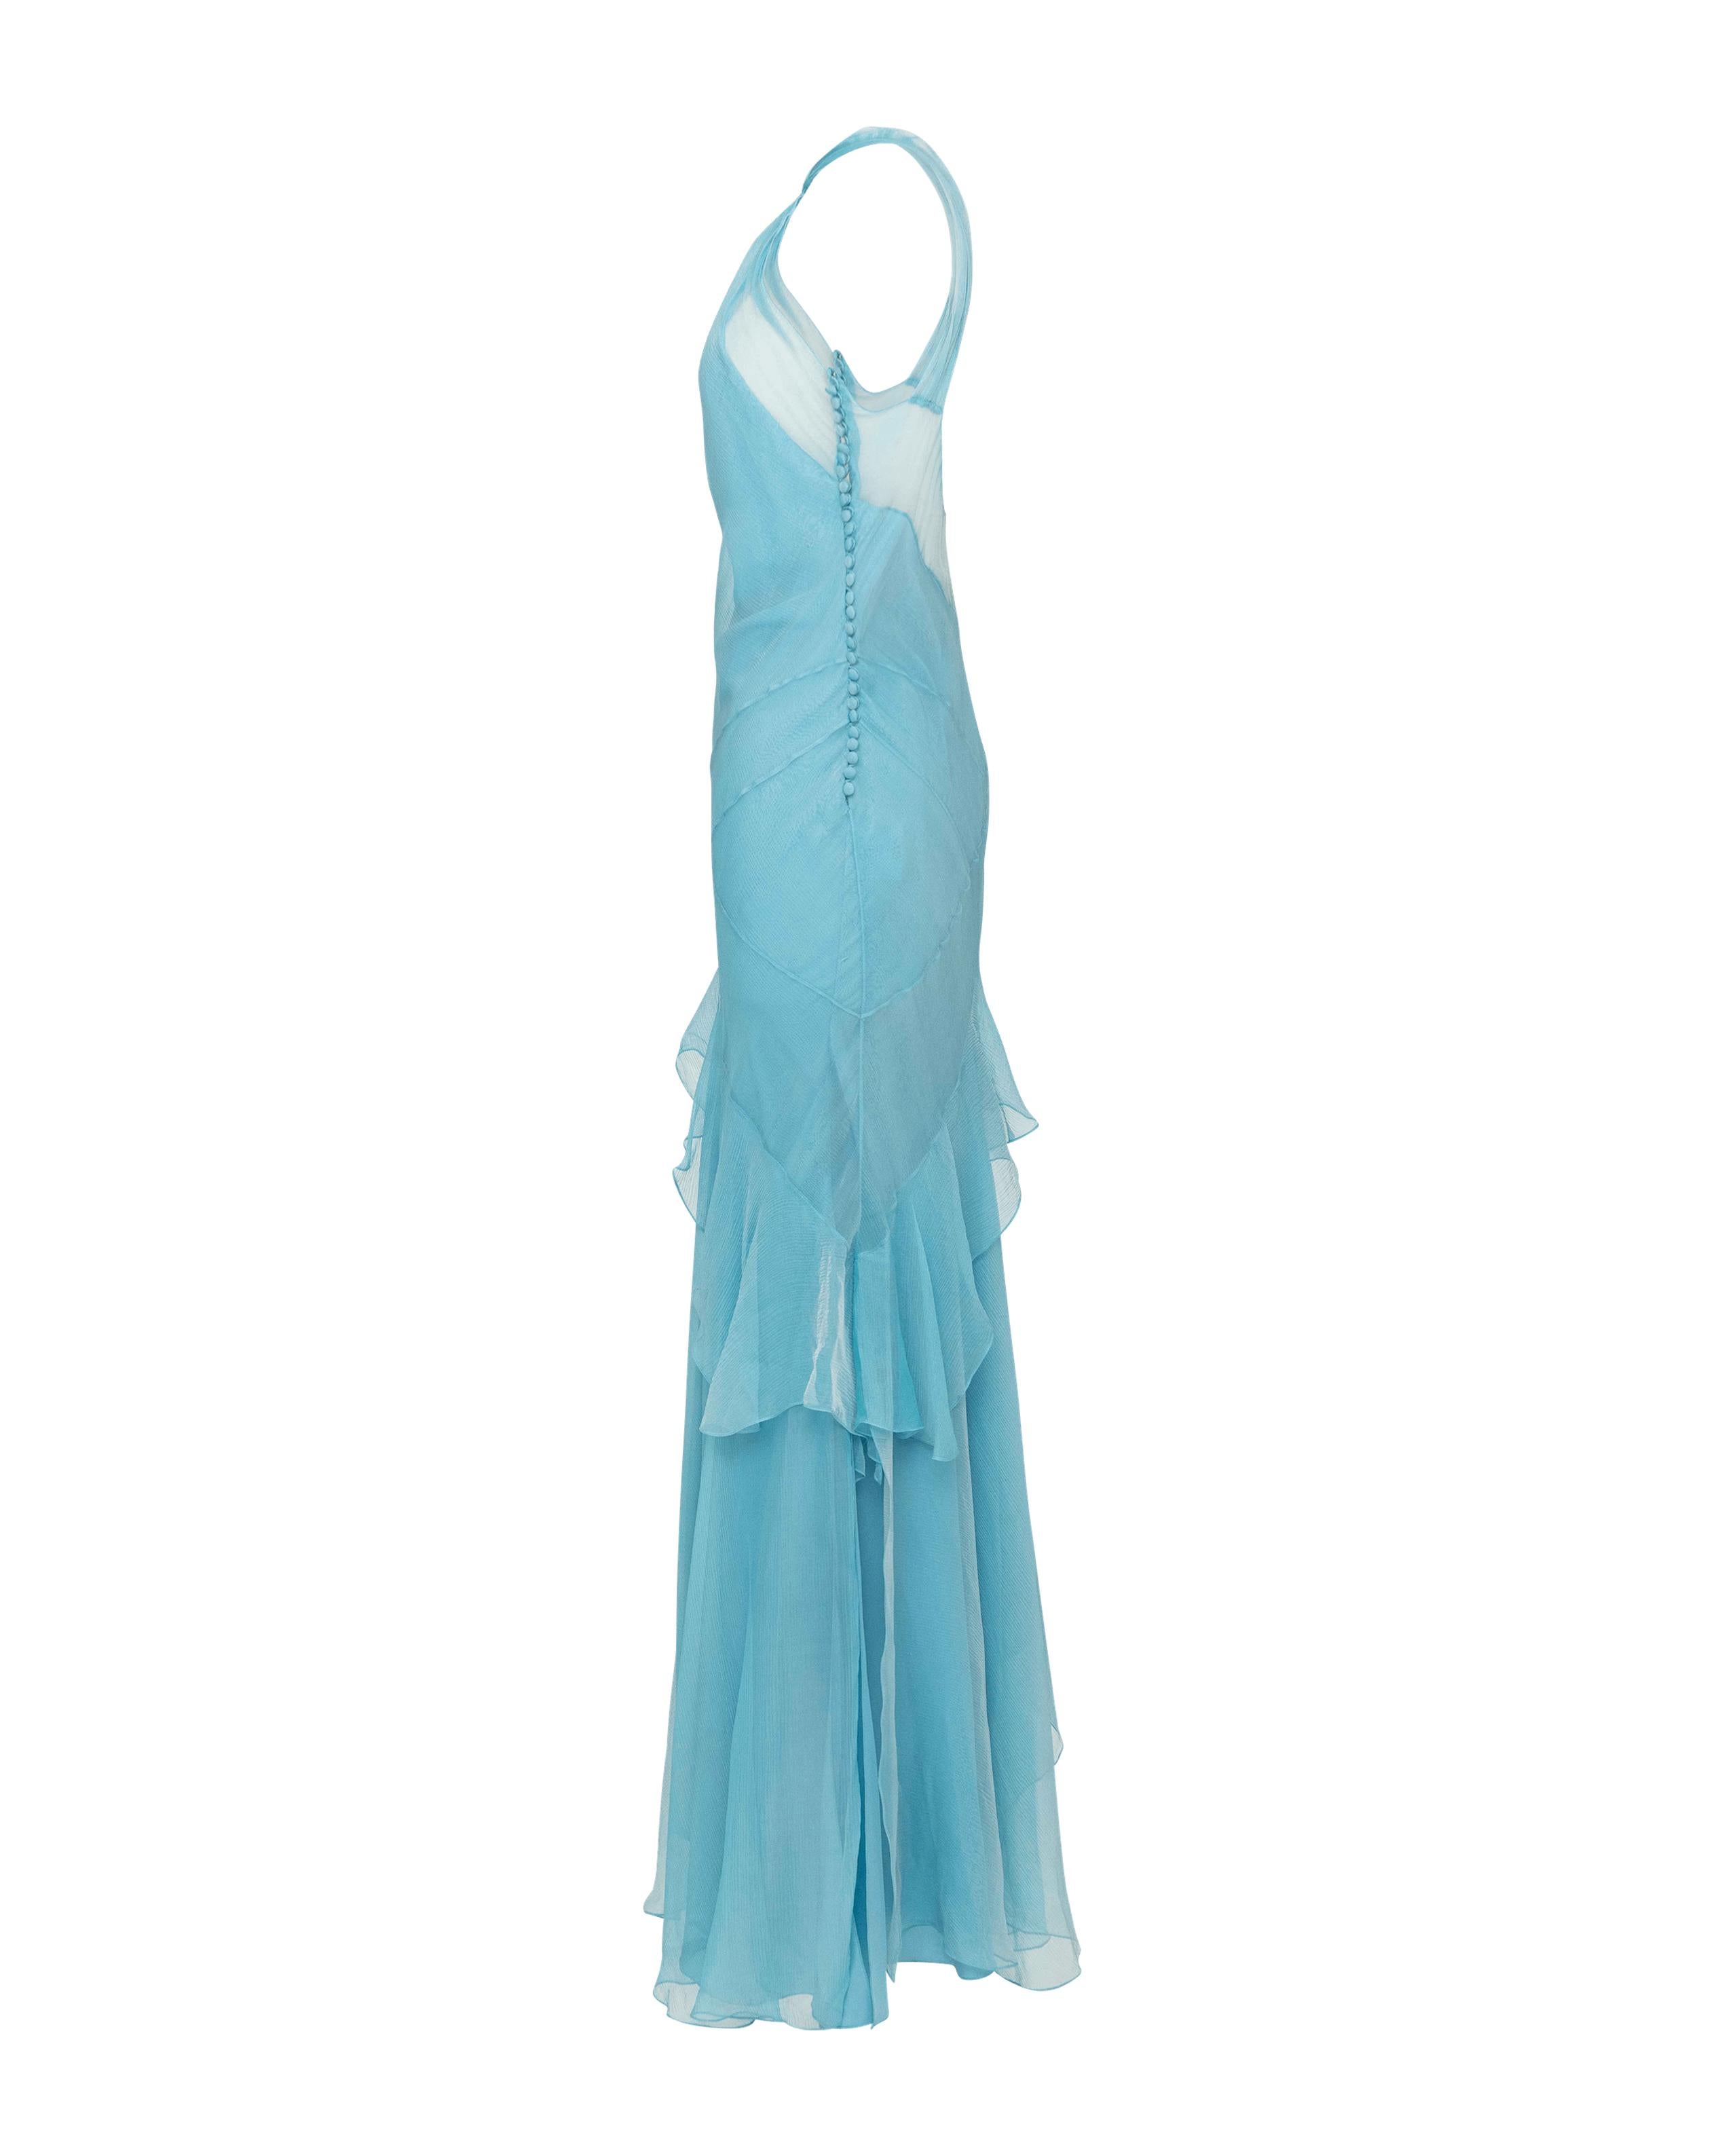 c. 2004 stunning and delicate blue Christian Dior by John Galliano silk chiffon bias-cut gown. Halter neckline and asymmetrical ruffle hem create beautiful shape. Signature Galliano 1930's inspired buttons down the side. As seen on socialite Tinsley